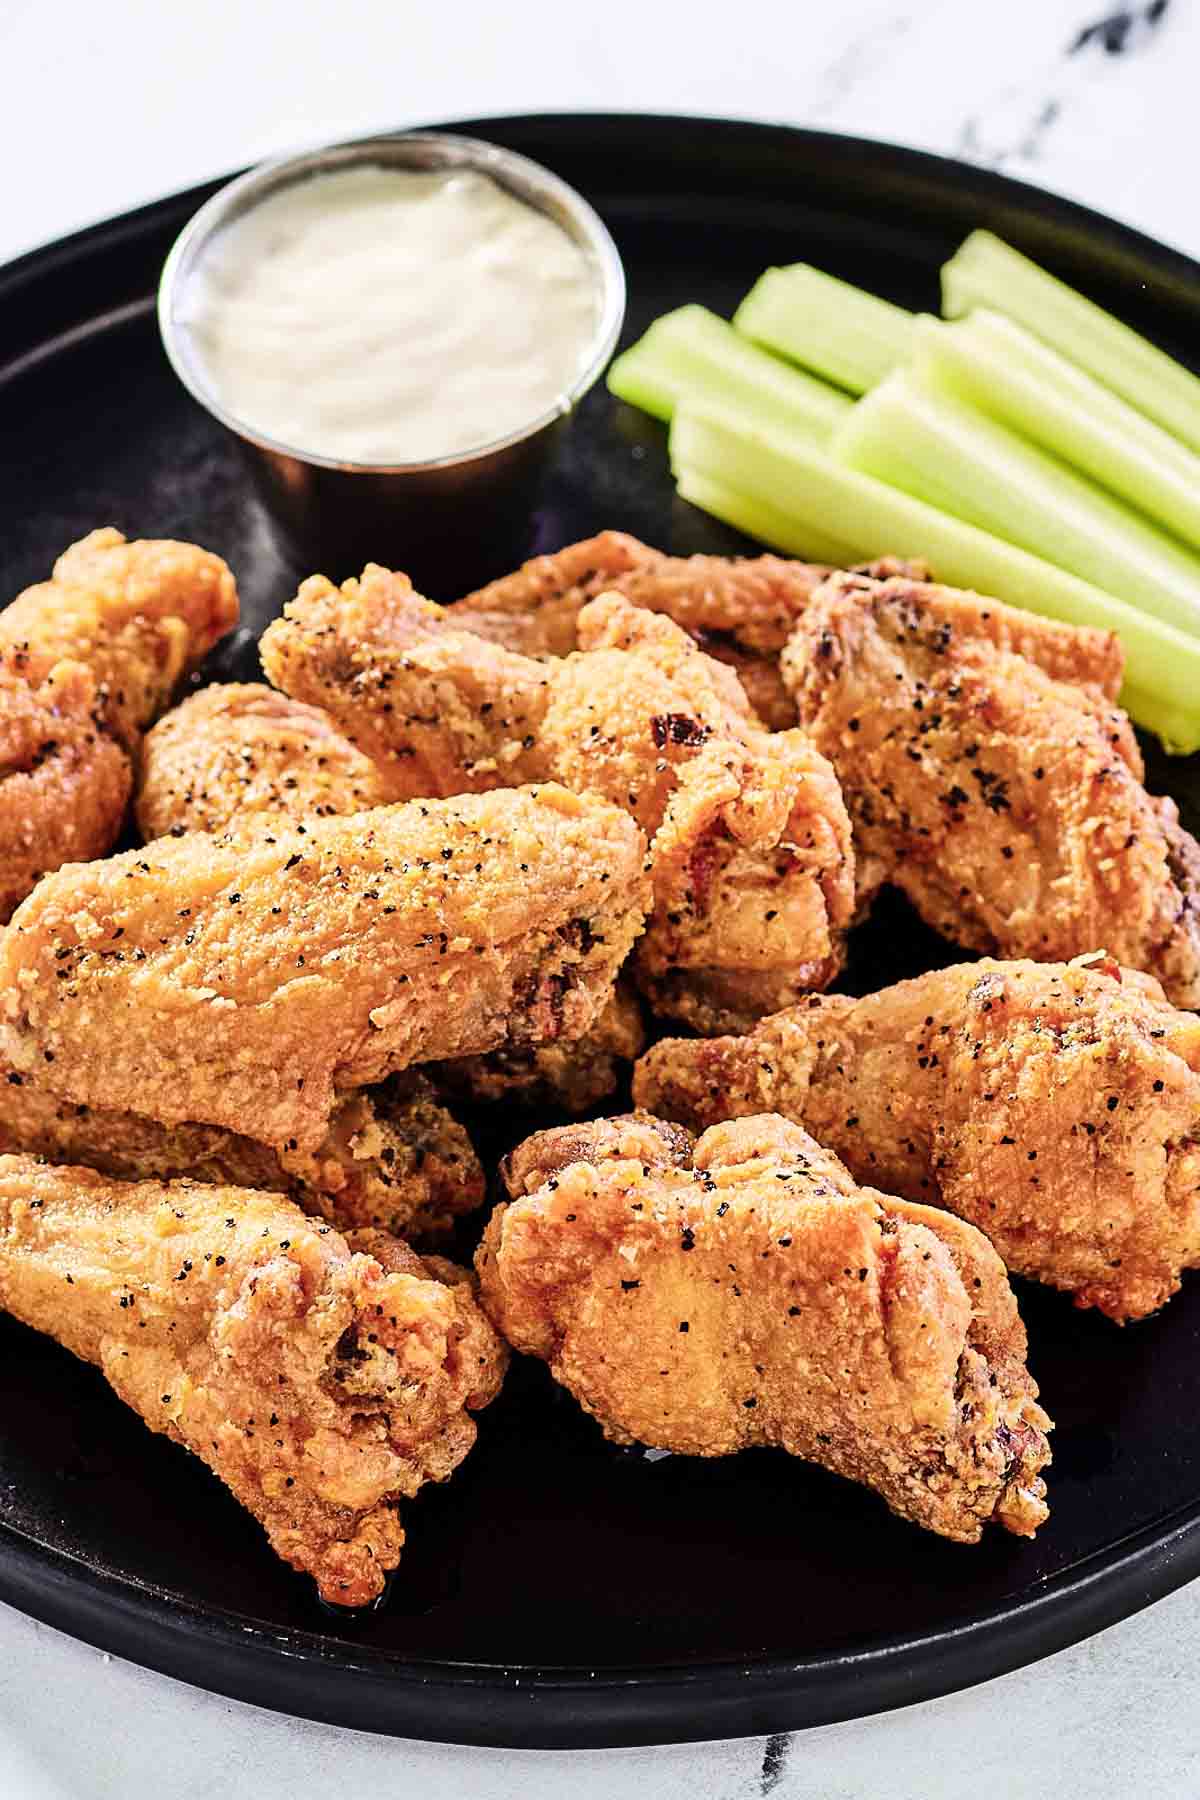 Breaded lemon pepper wings, dipping sauce, and celery sticks on a plate.